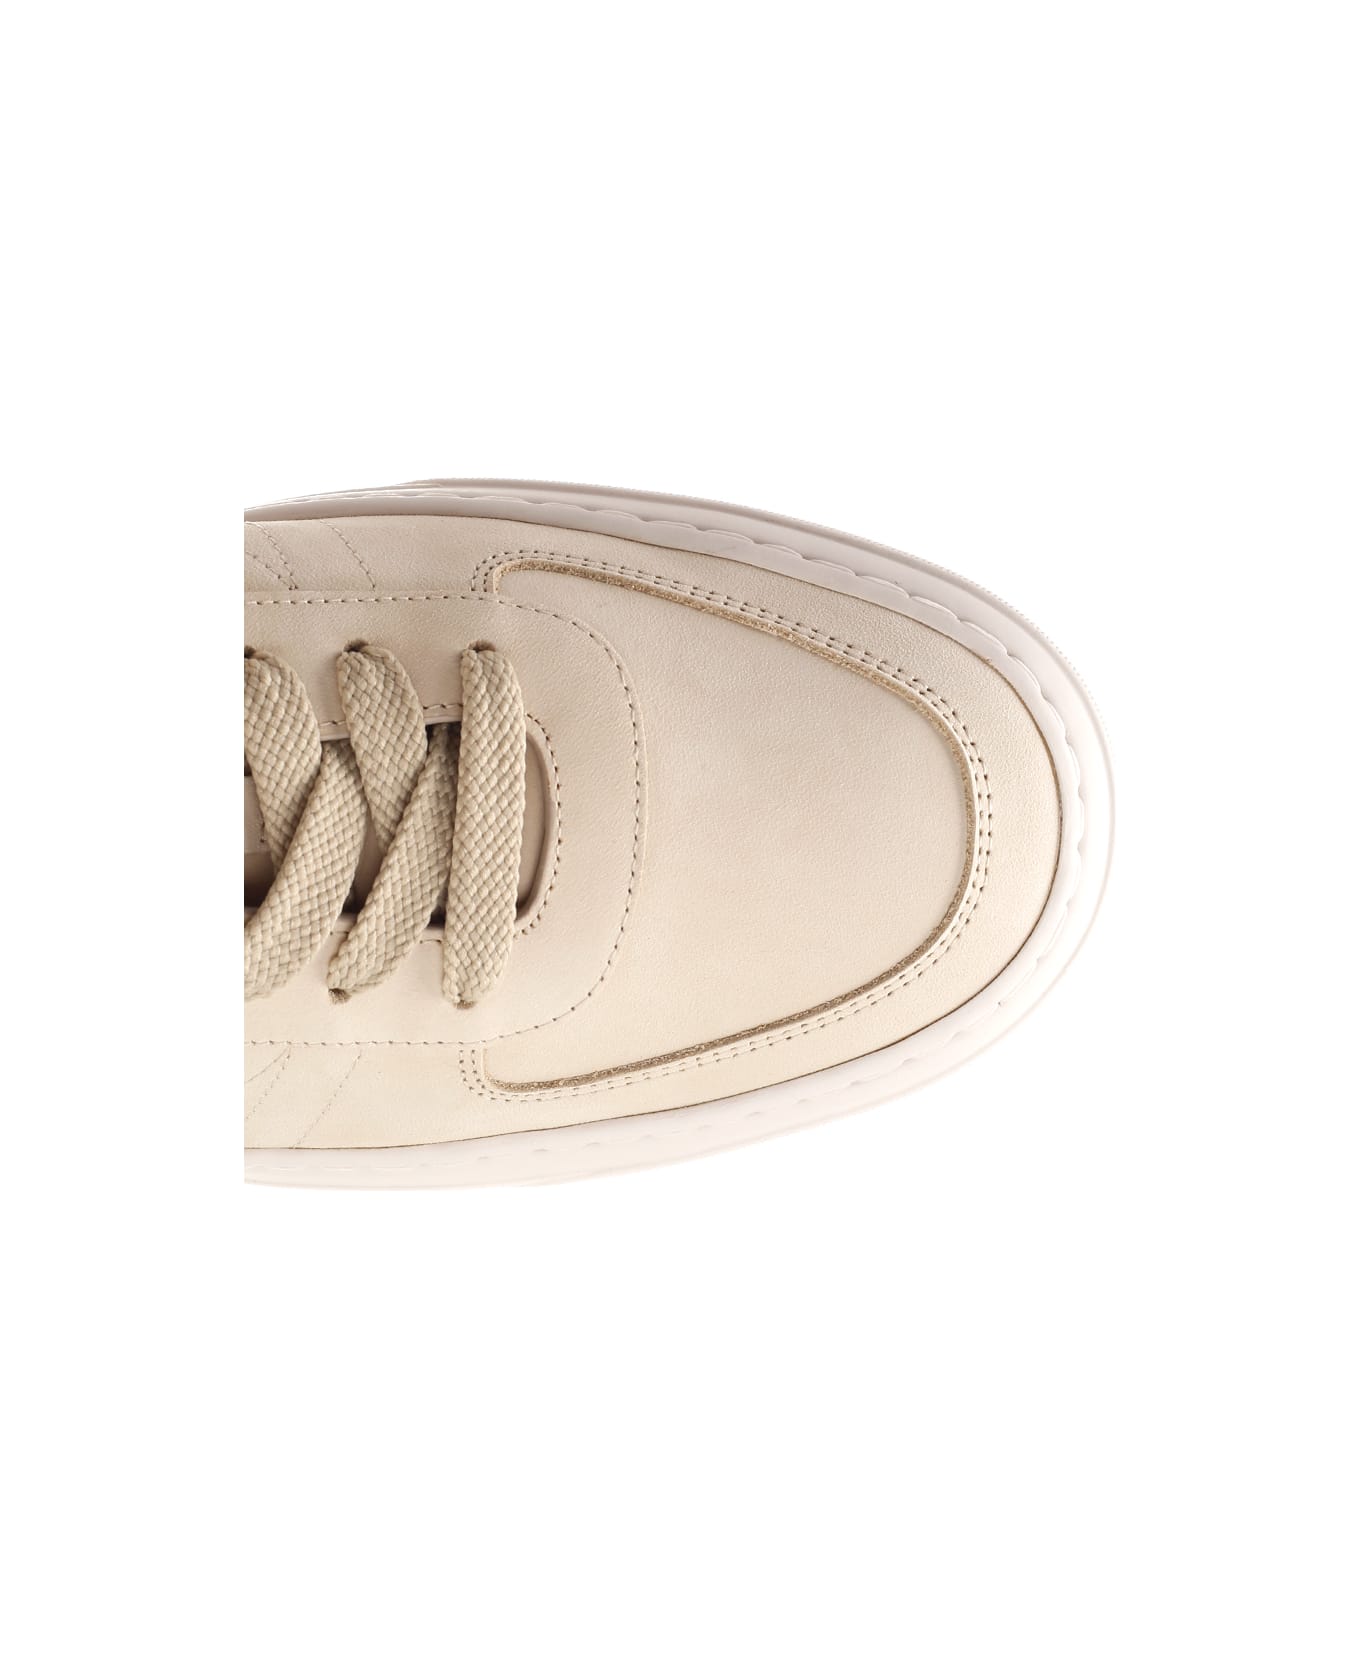 Moncler 'monclub' Low Sneakers In Leather スニーカー